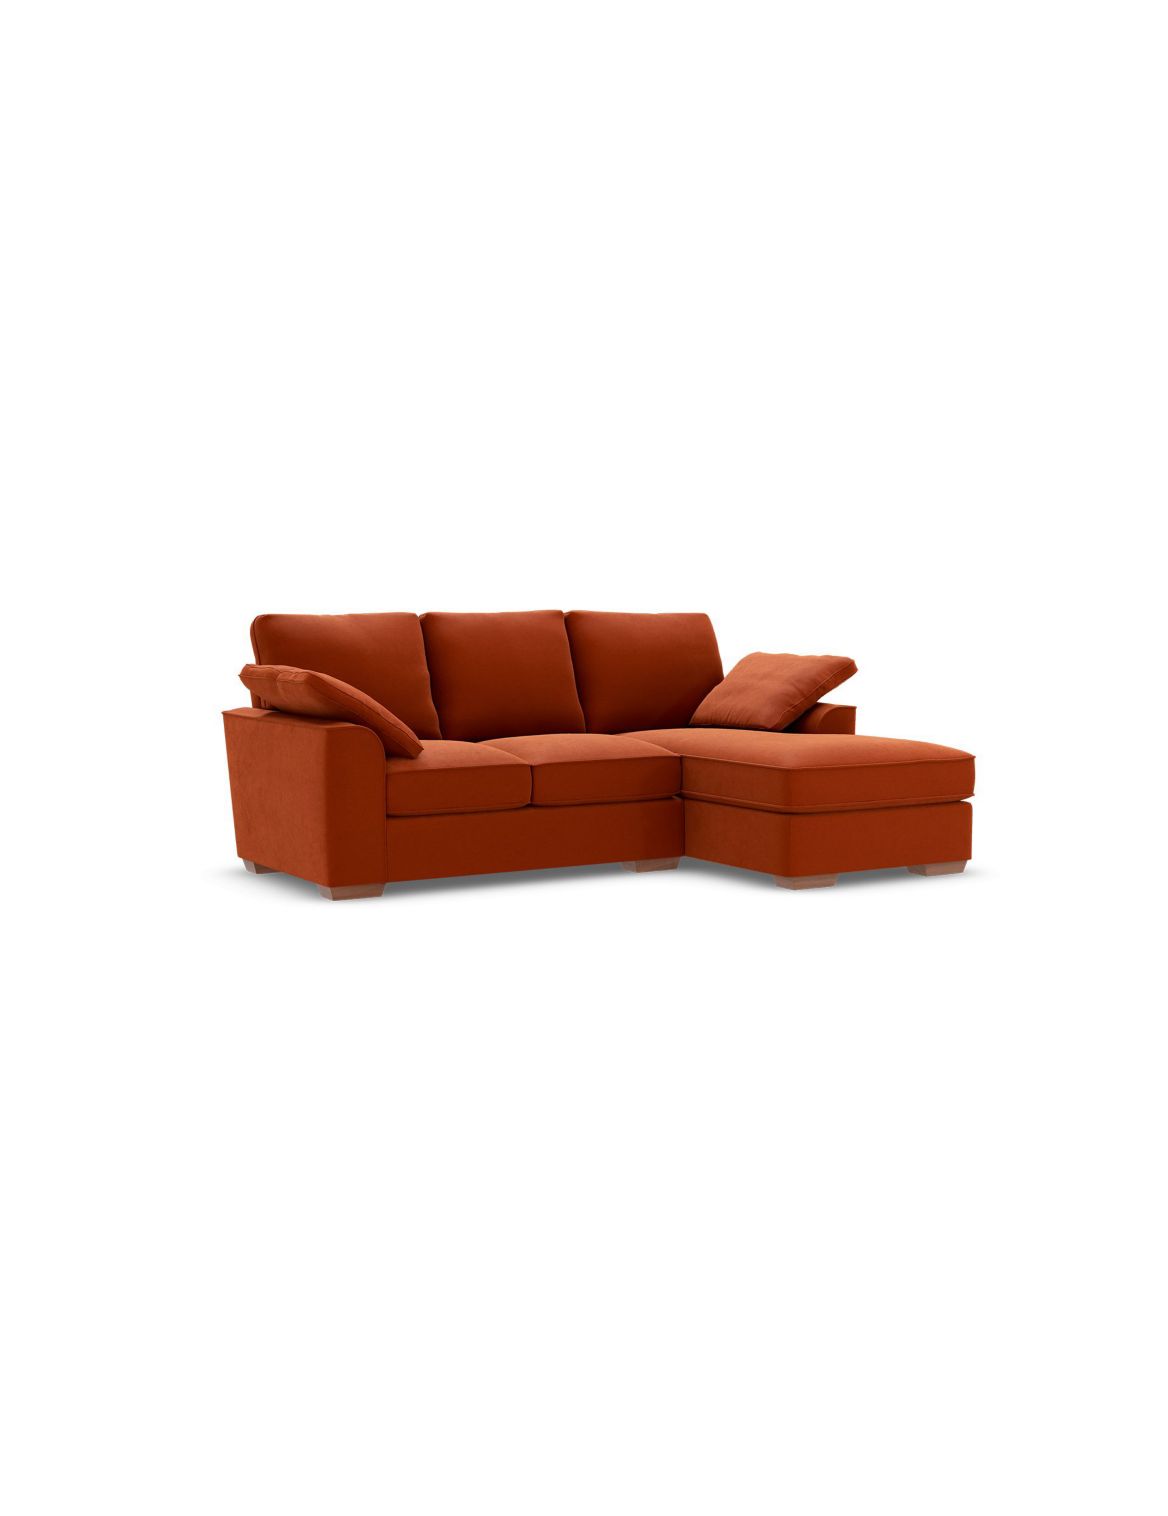 Nantucket 3 Seater Chaise (Right-Hand) orange